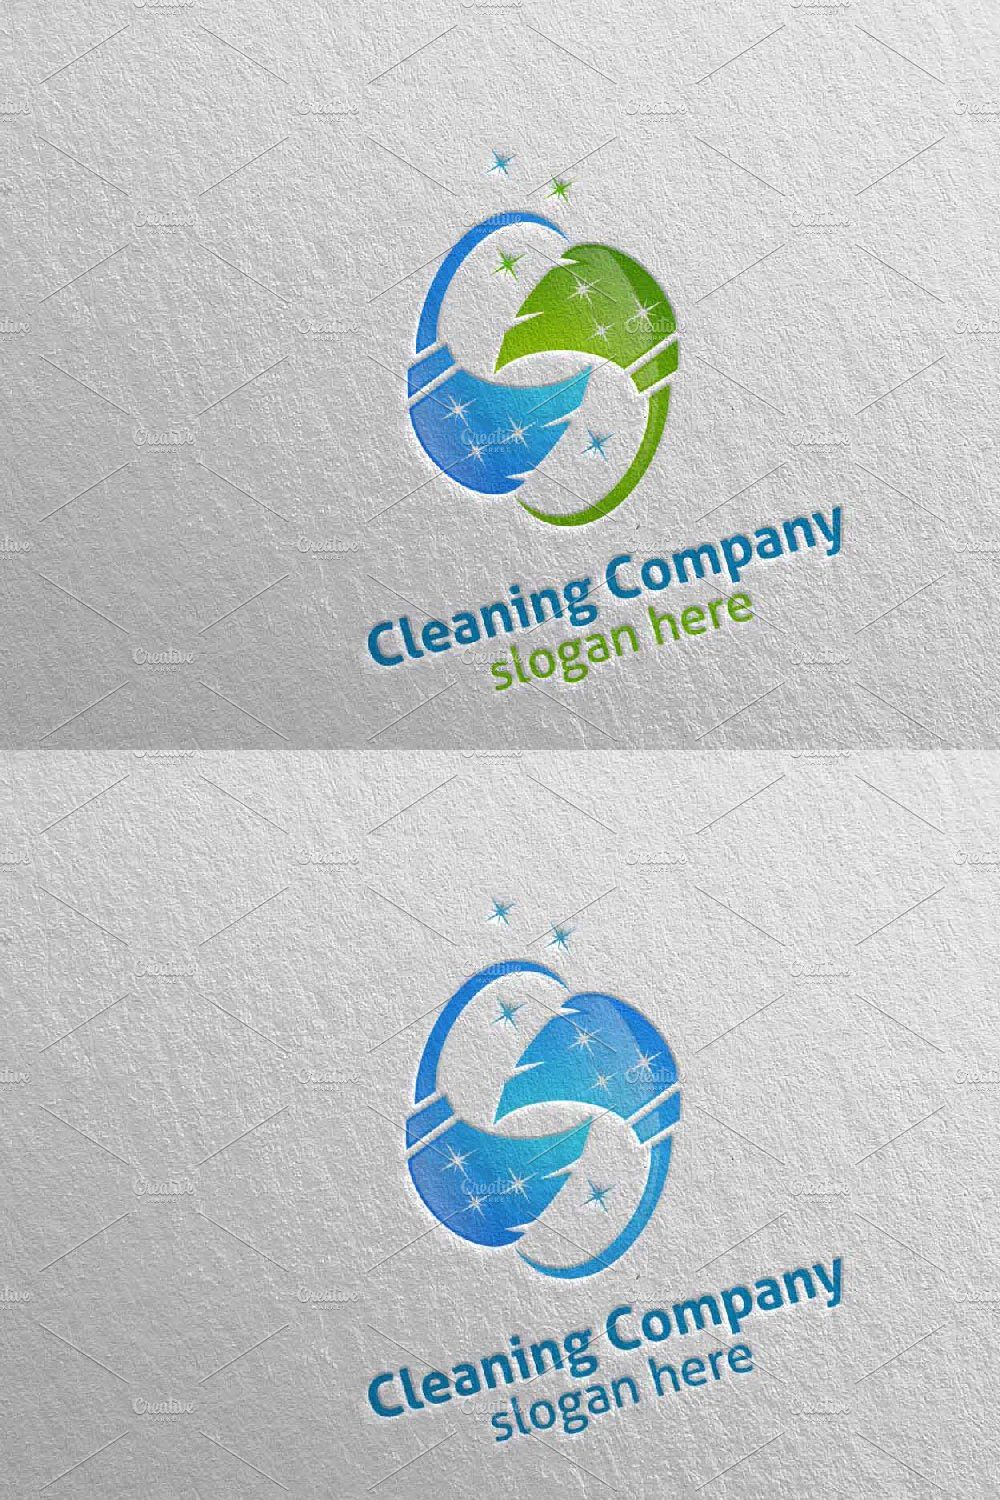 Cleaning Service Eco Friendly Logo 4 pinterest preview image.